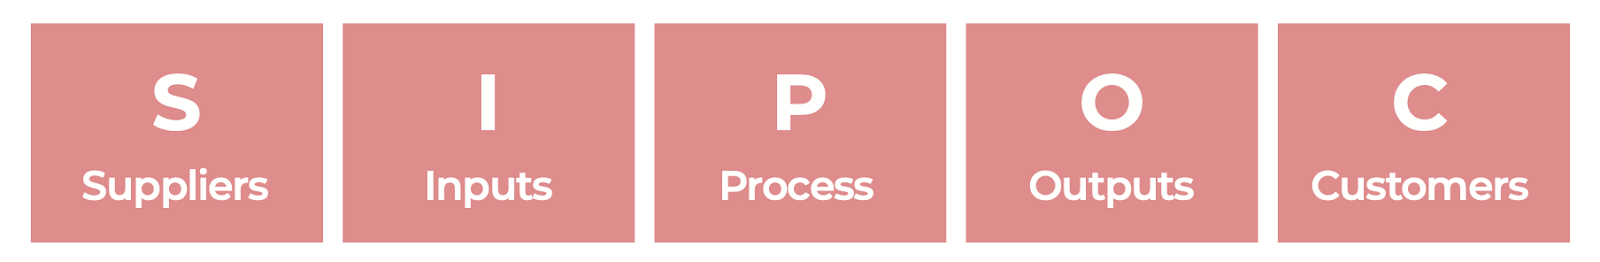 SIPOC: suppliers, inputs, process, outputs, and customers